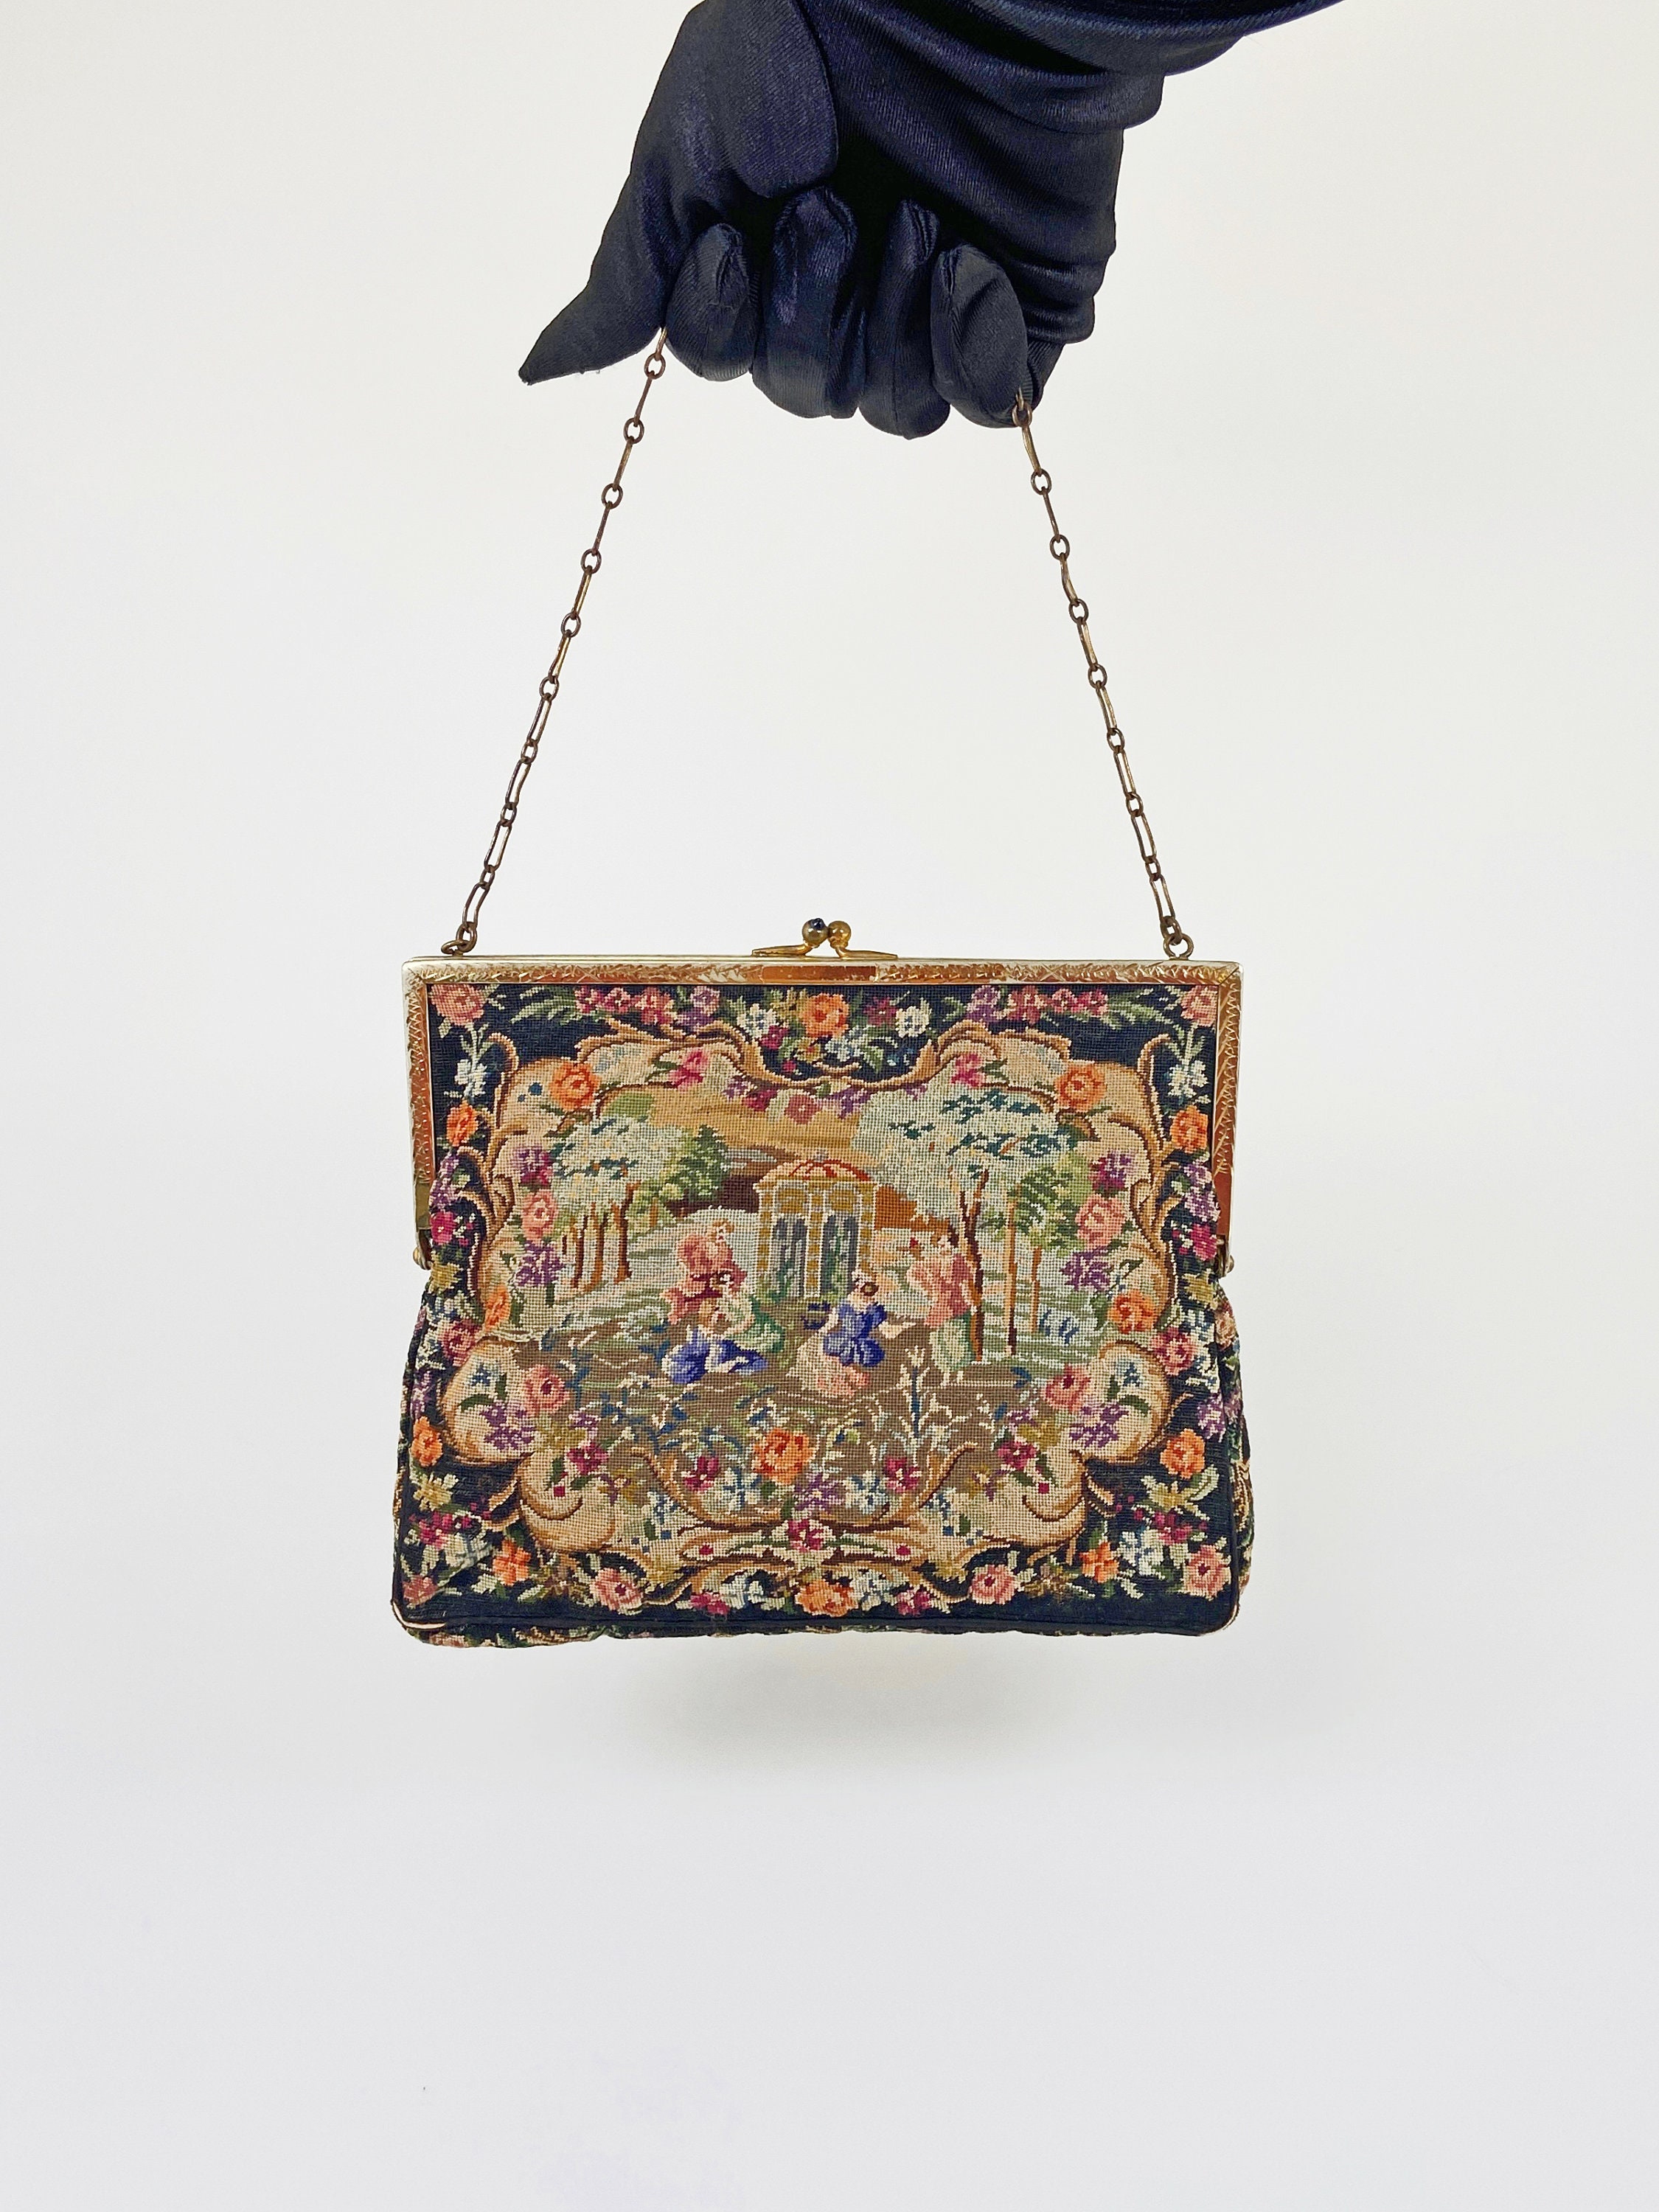 The Closet Historian: Fantastic 1940's Clutch Bags and Where to